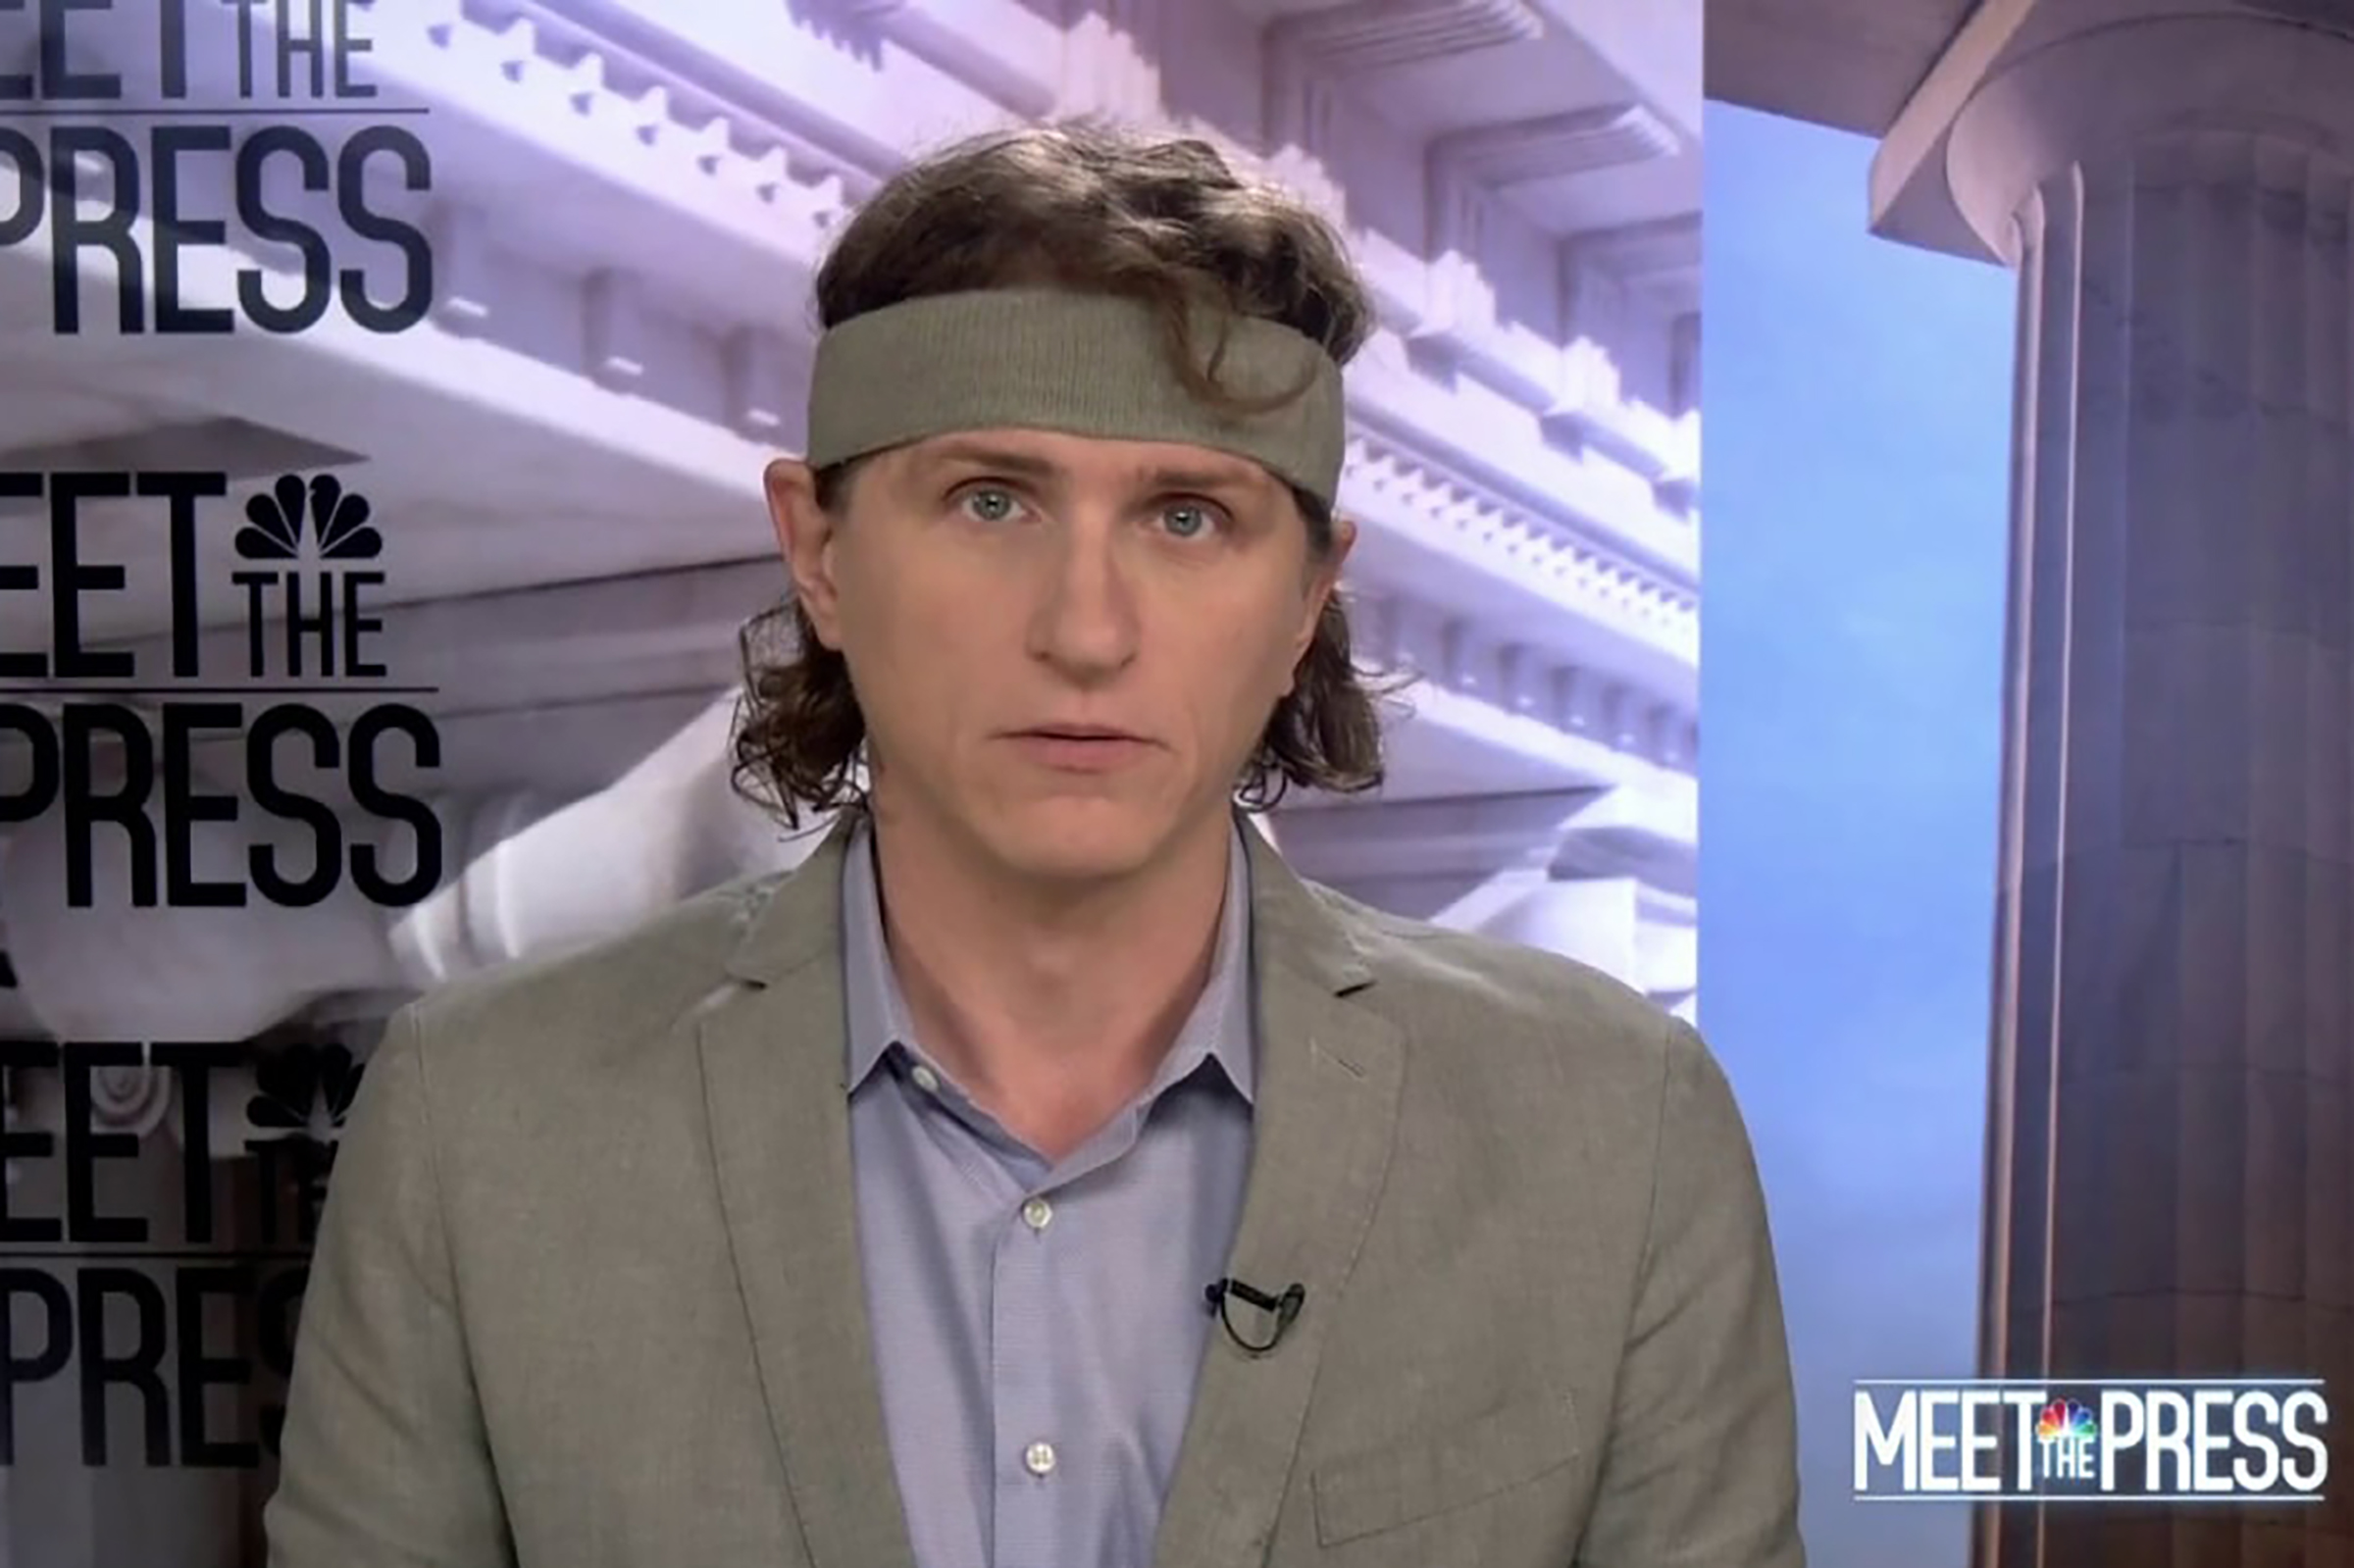 All Hail the WSJ Reporter Who Wore a Headband on “Meet the Press”